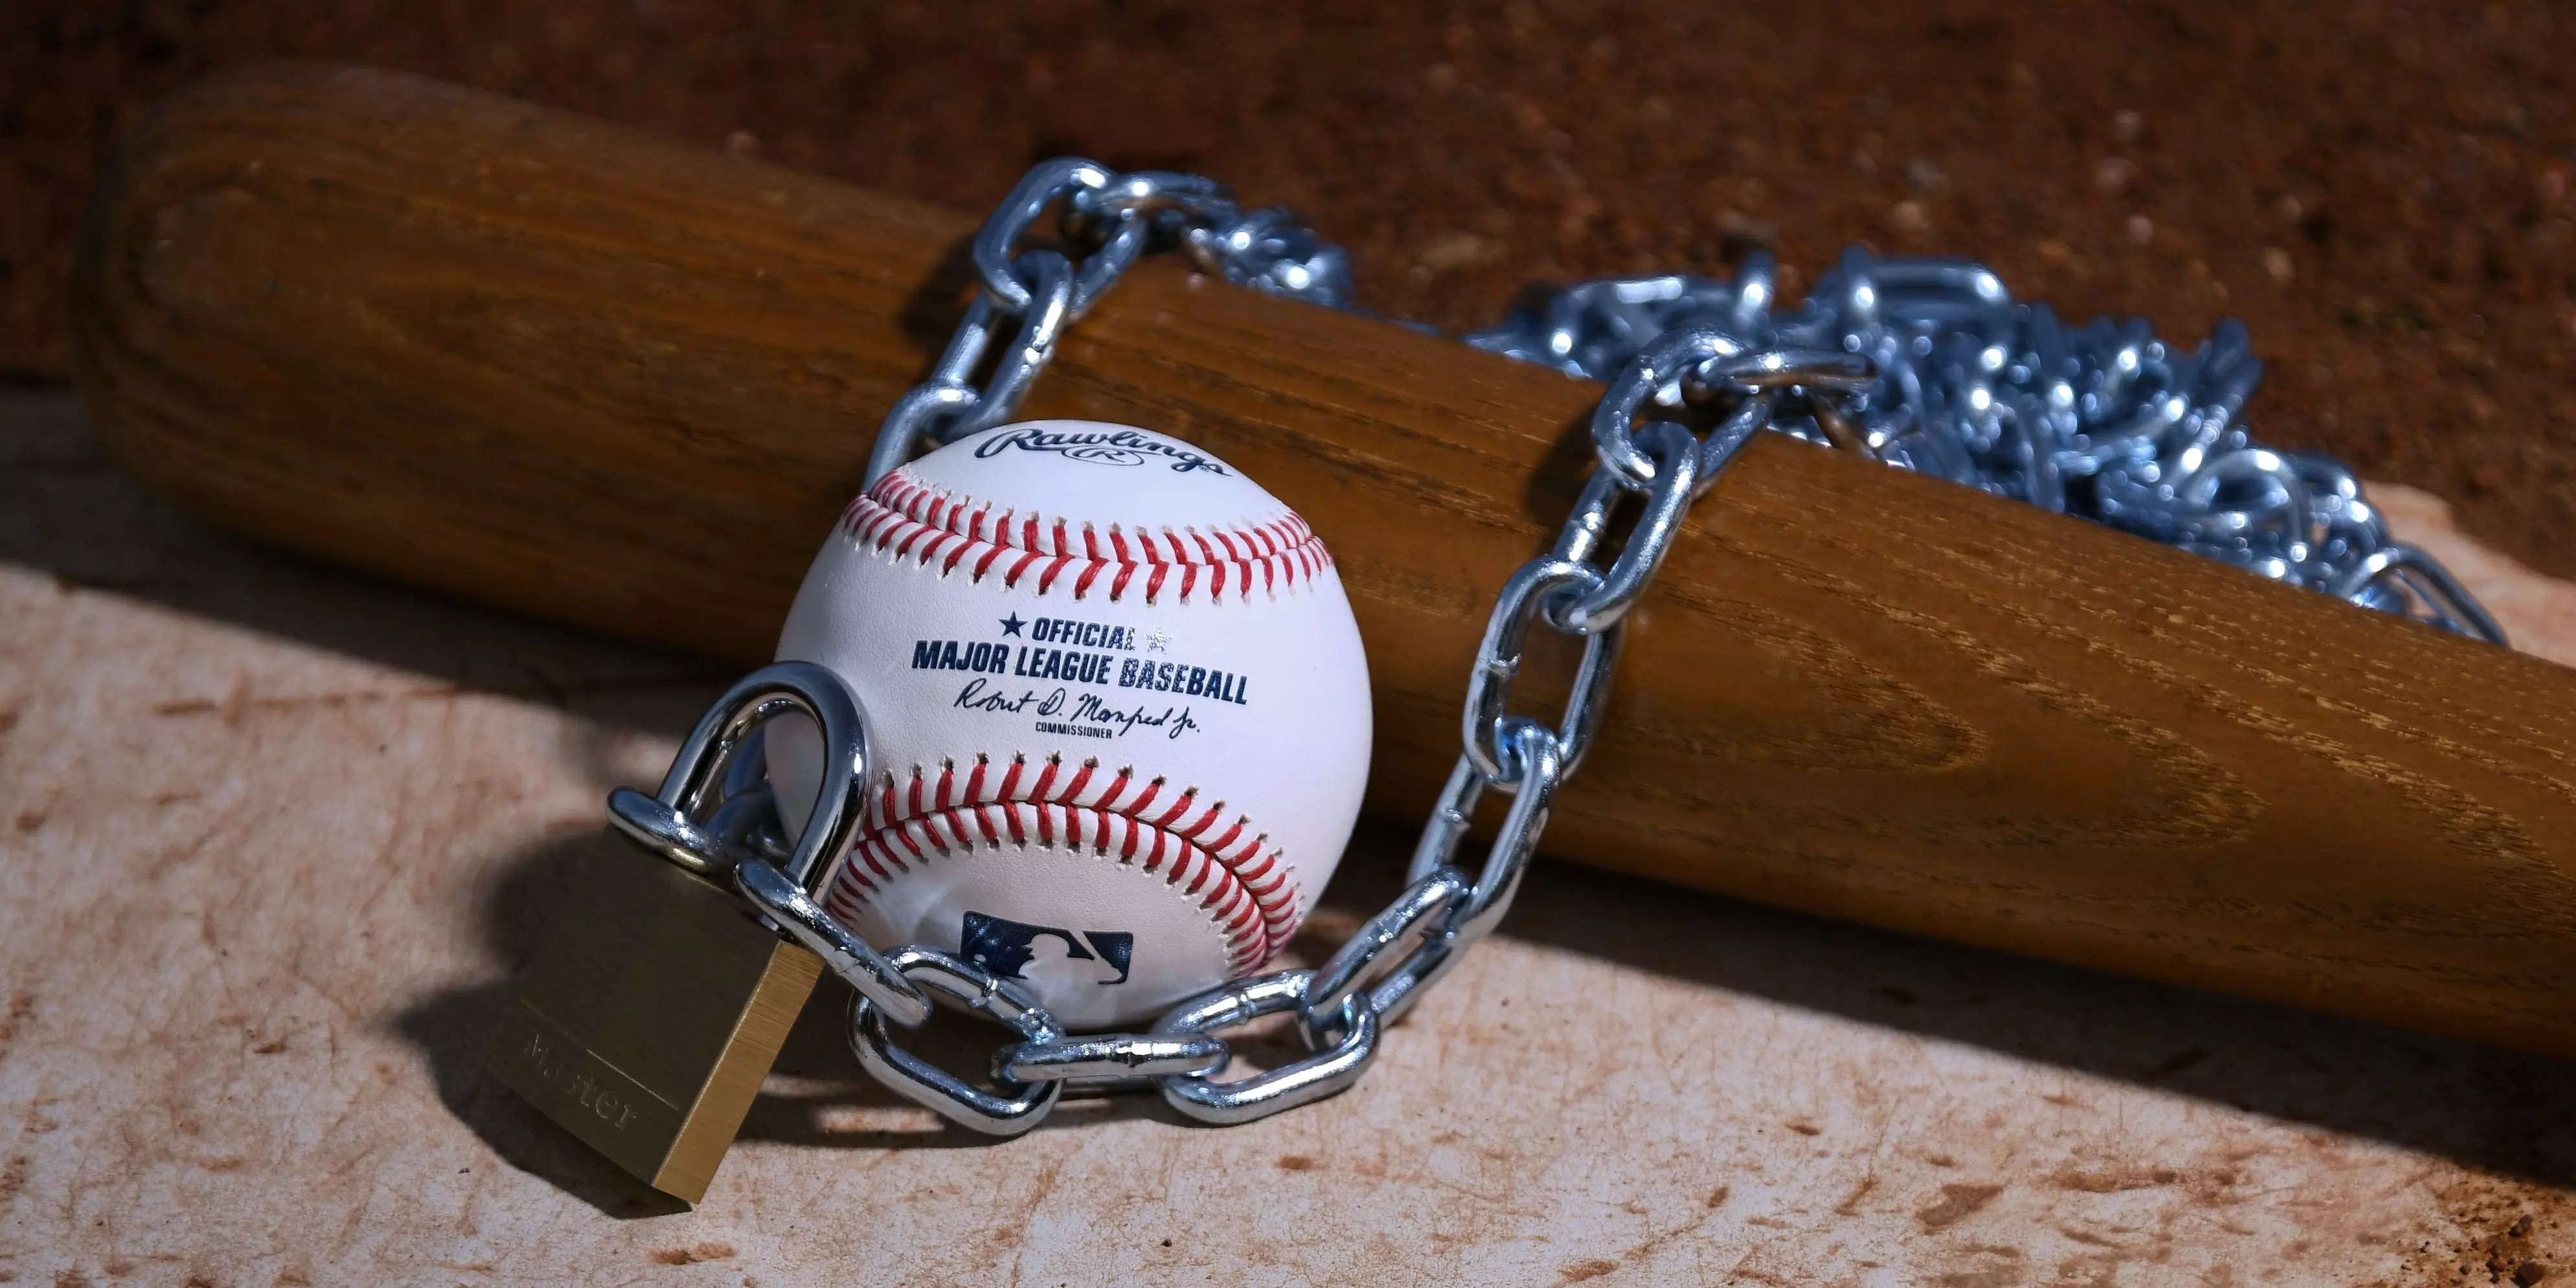 With MLB lockout ongoing, Marlins players organize their own